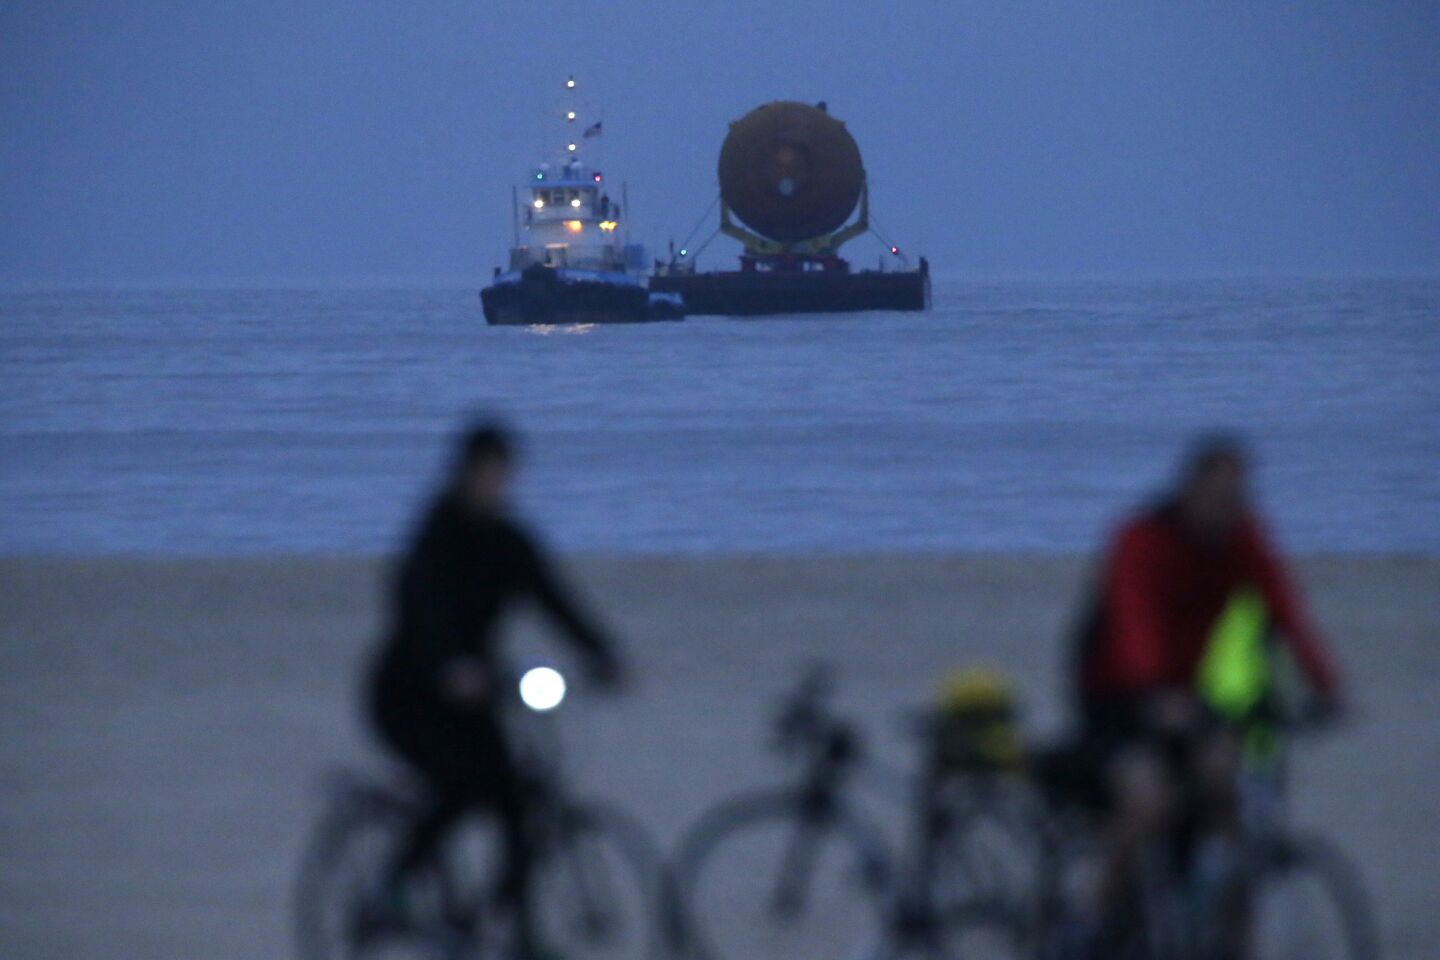 ET-94, NASA's last remaining space shuttle external tank, approaches Marina del Rey, pulled by a tugboat Wednesday morning.